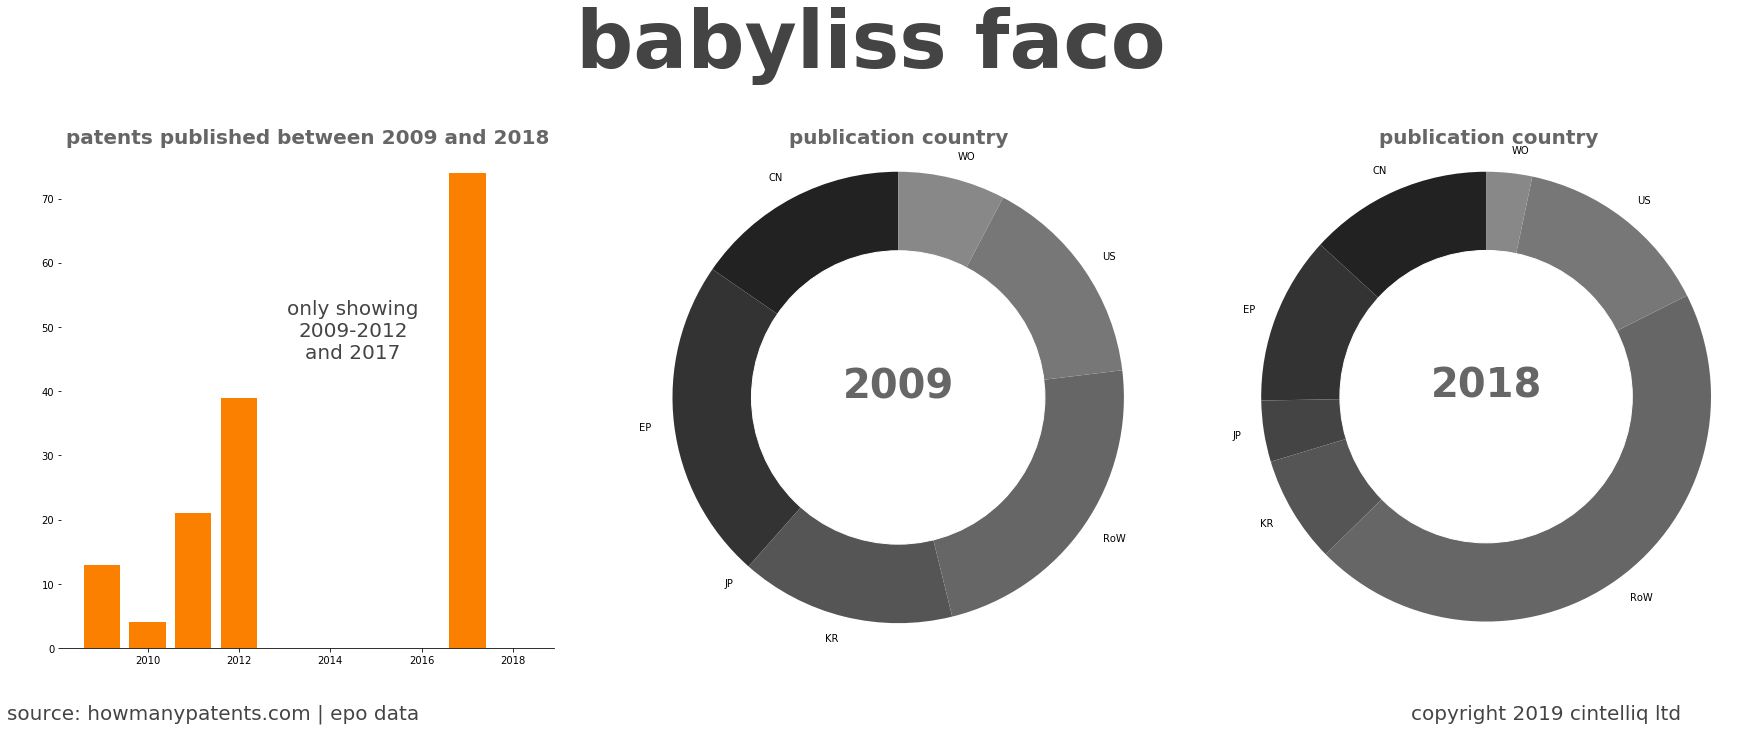 summary of patents for Babyliss Faco